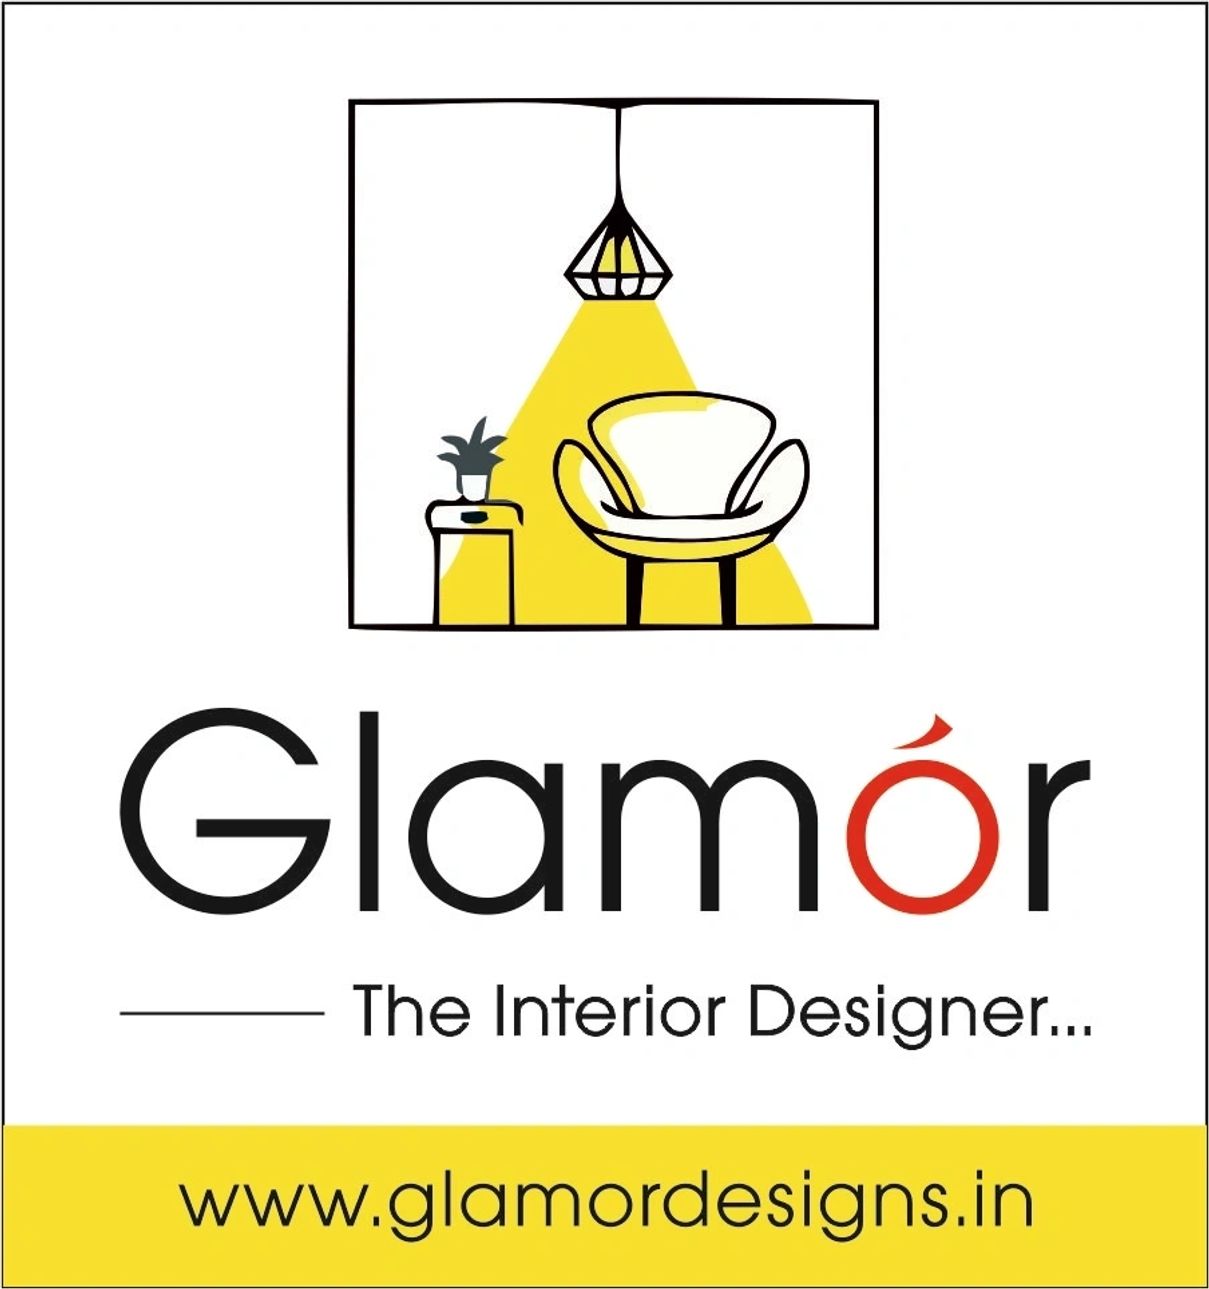 GLAMOR The Interior Designers|Accounting Services|Professional Services